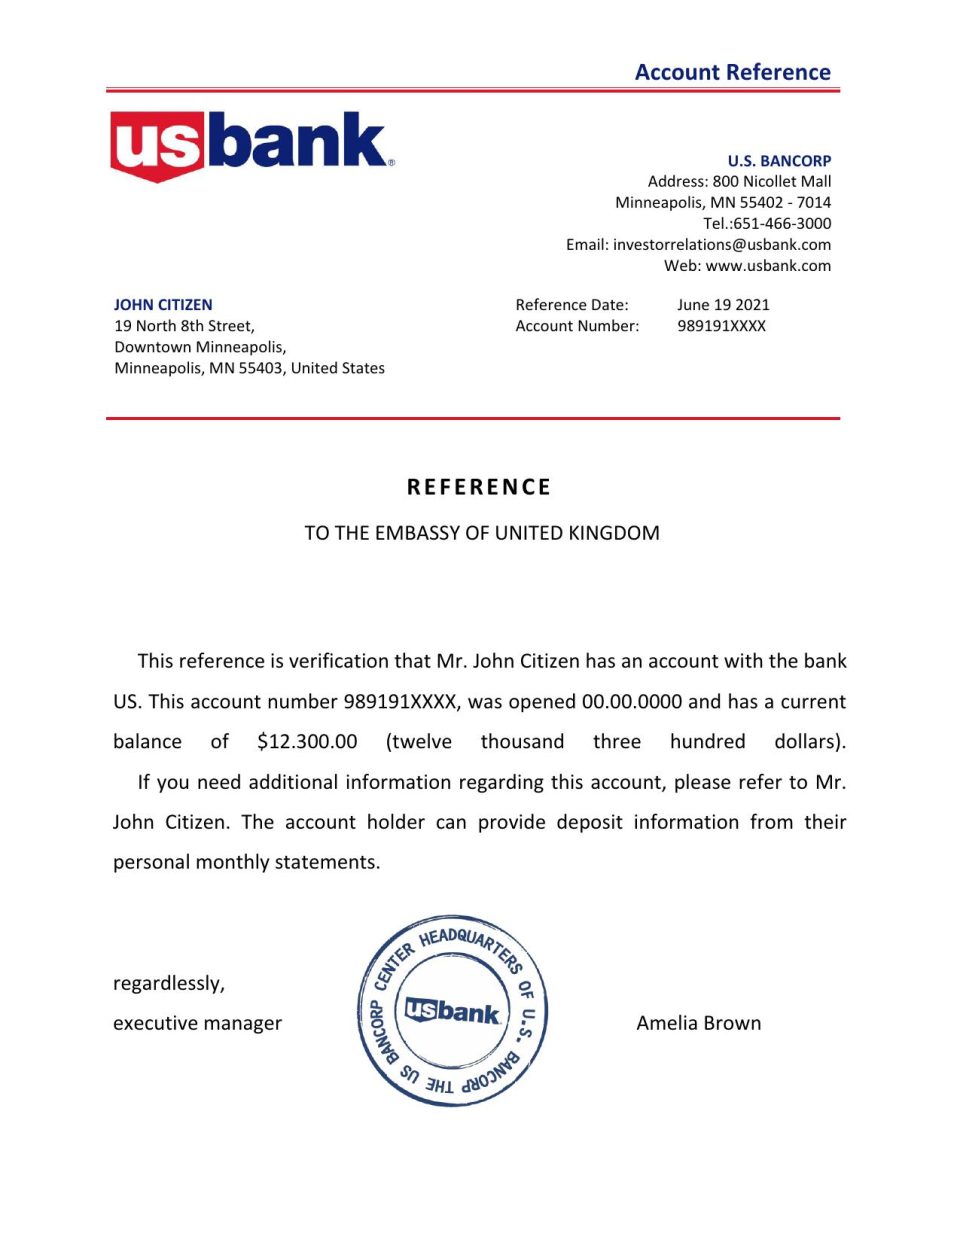 USA US Bank bank account reference letter template in Word and PDF format